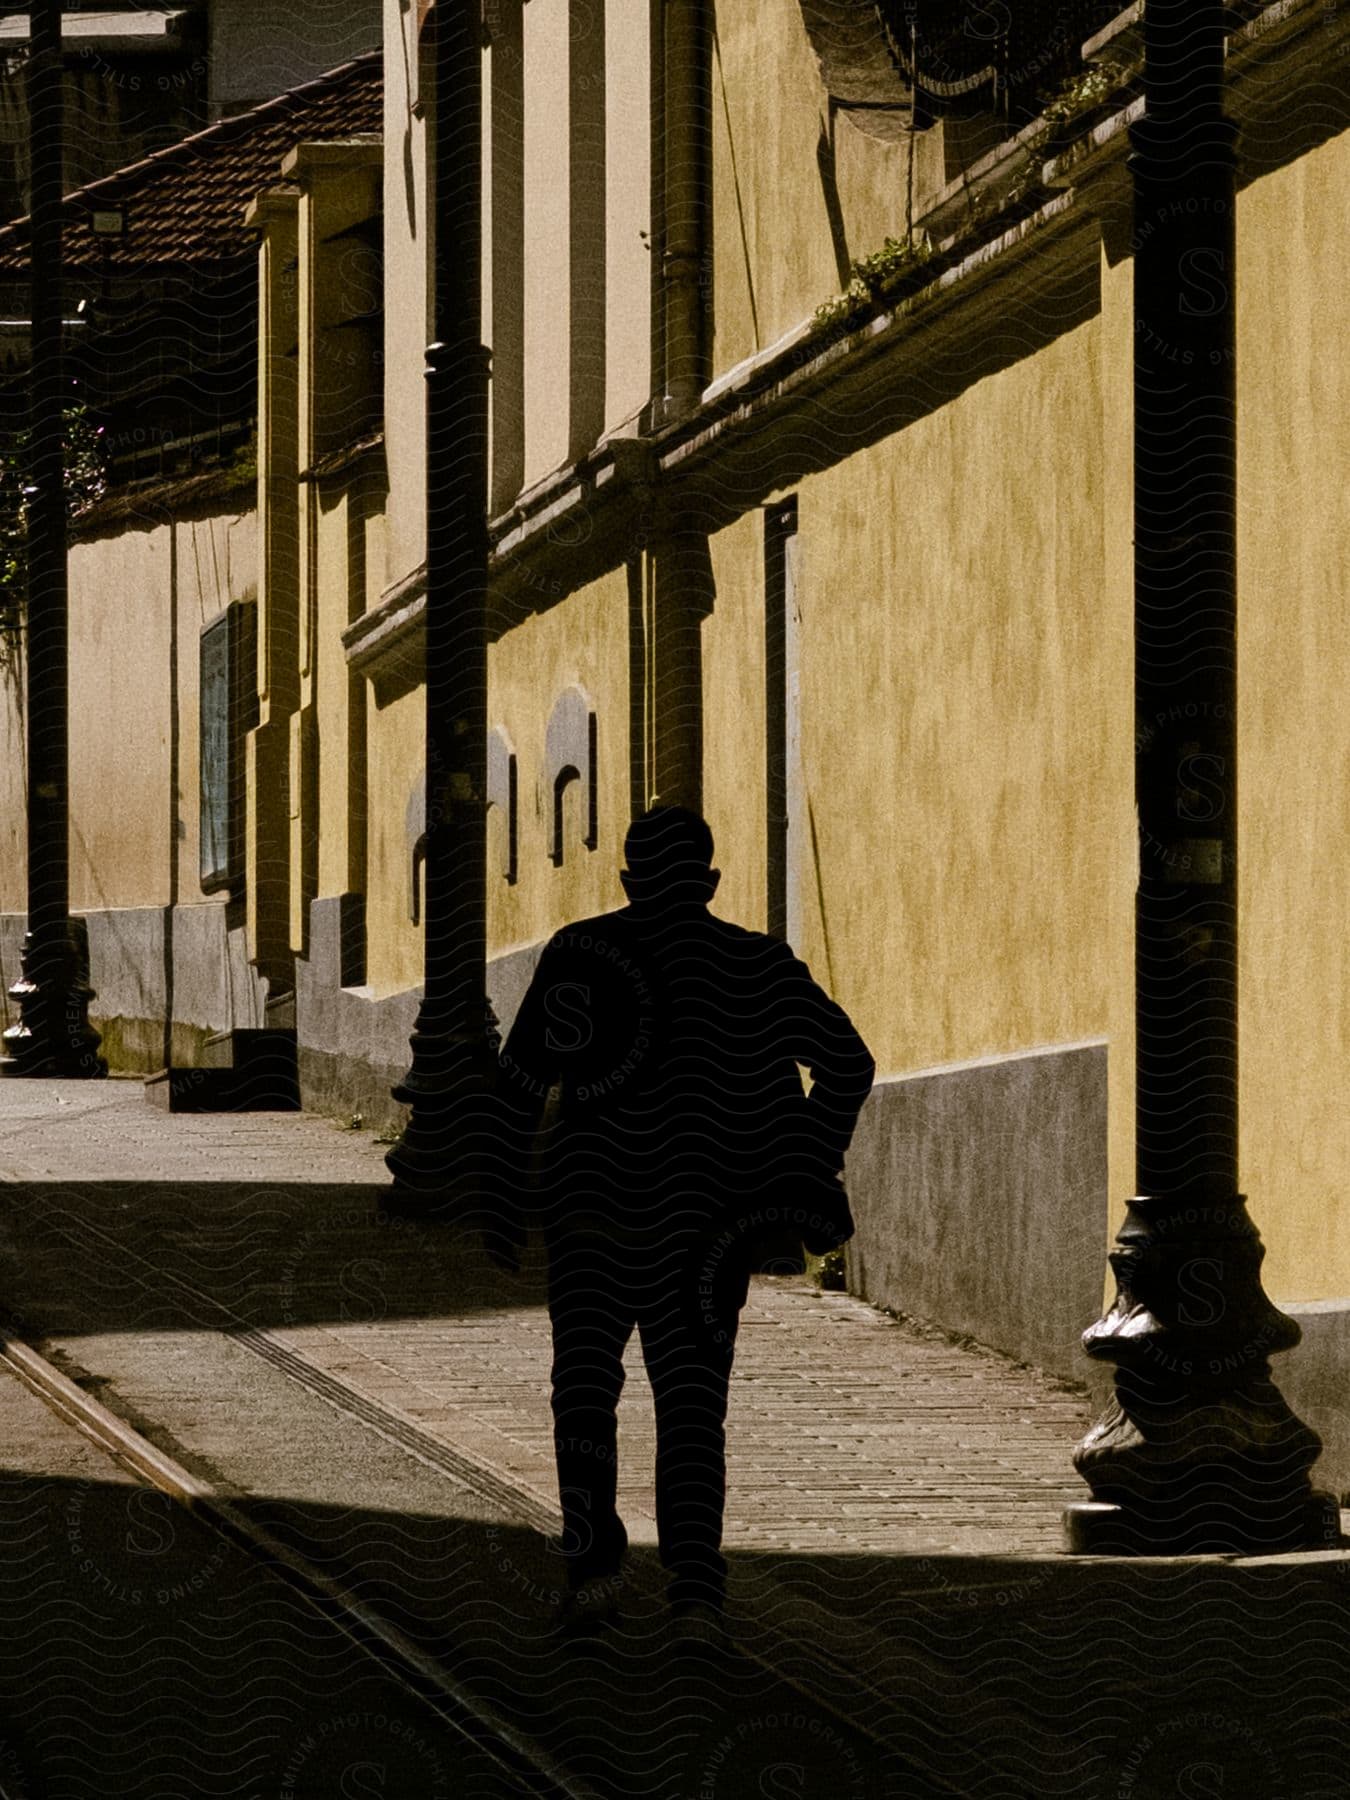 Man walking up the street is silhouetted at daytime in an urban setting